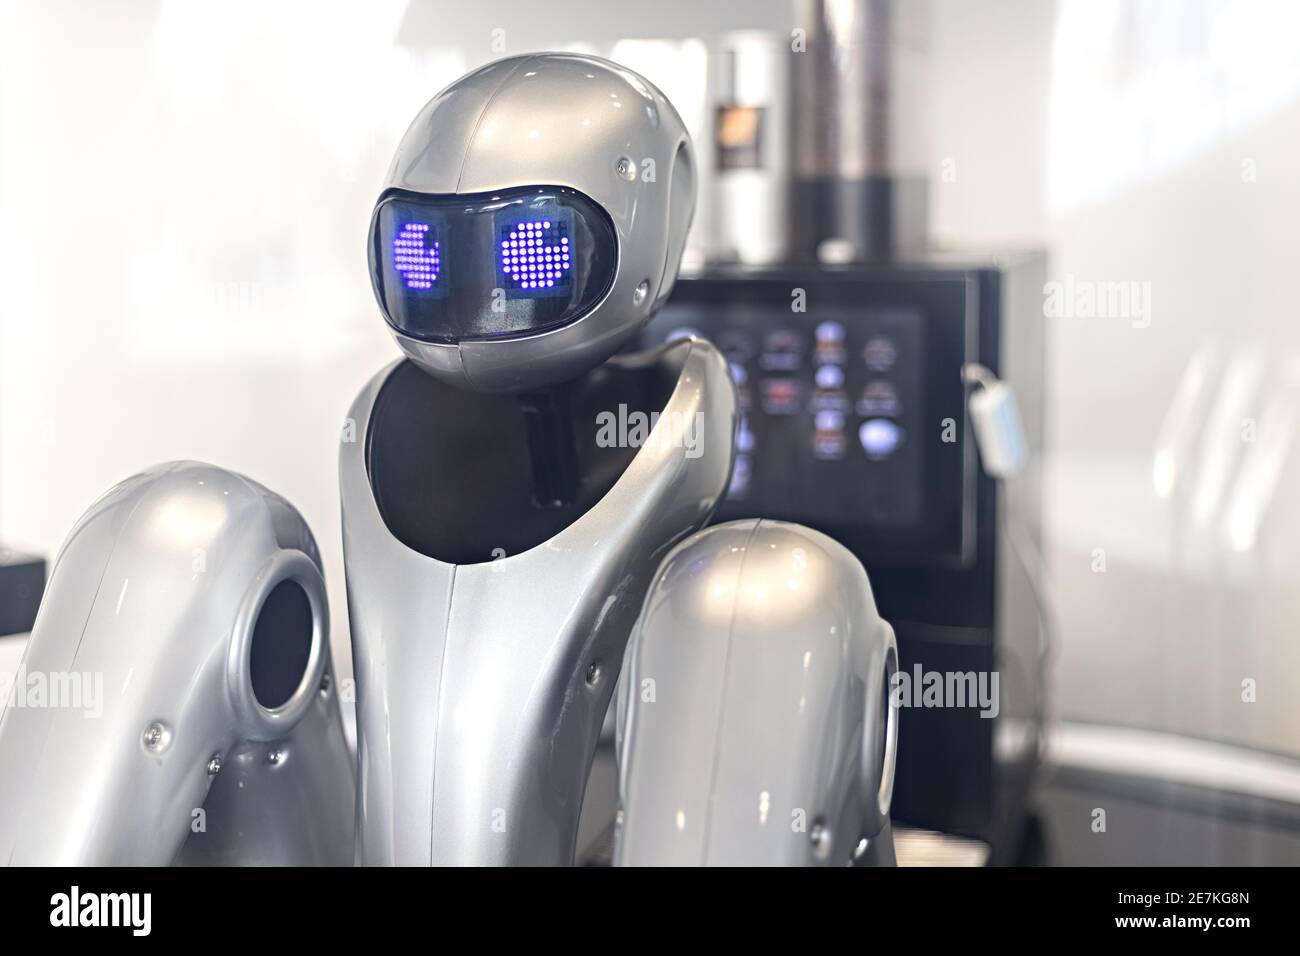 Robot barista, contactless service.Robotics. Technology trends in business. A futuristic concept Stock Photo